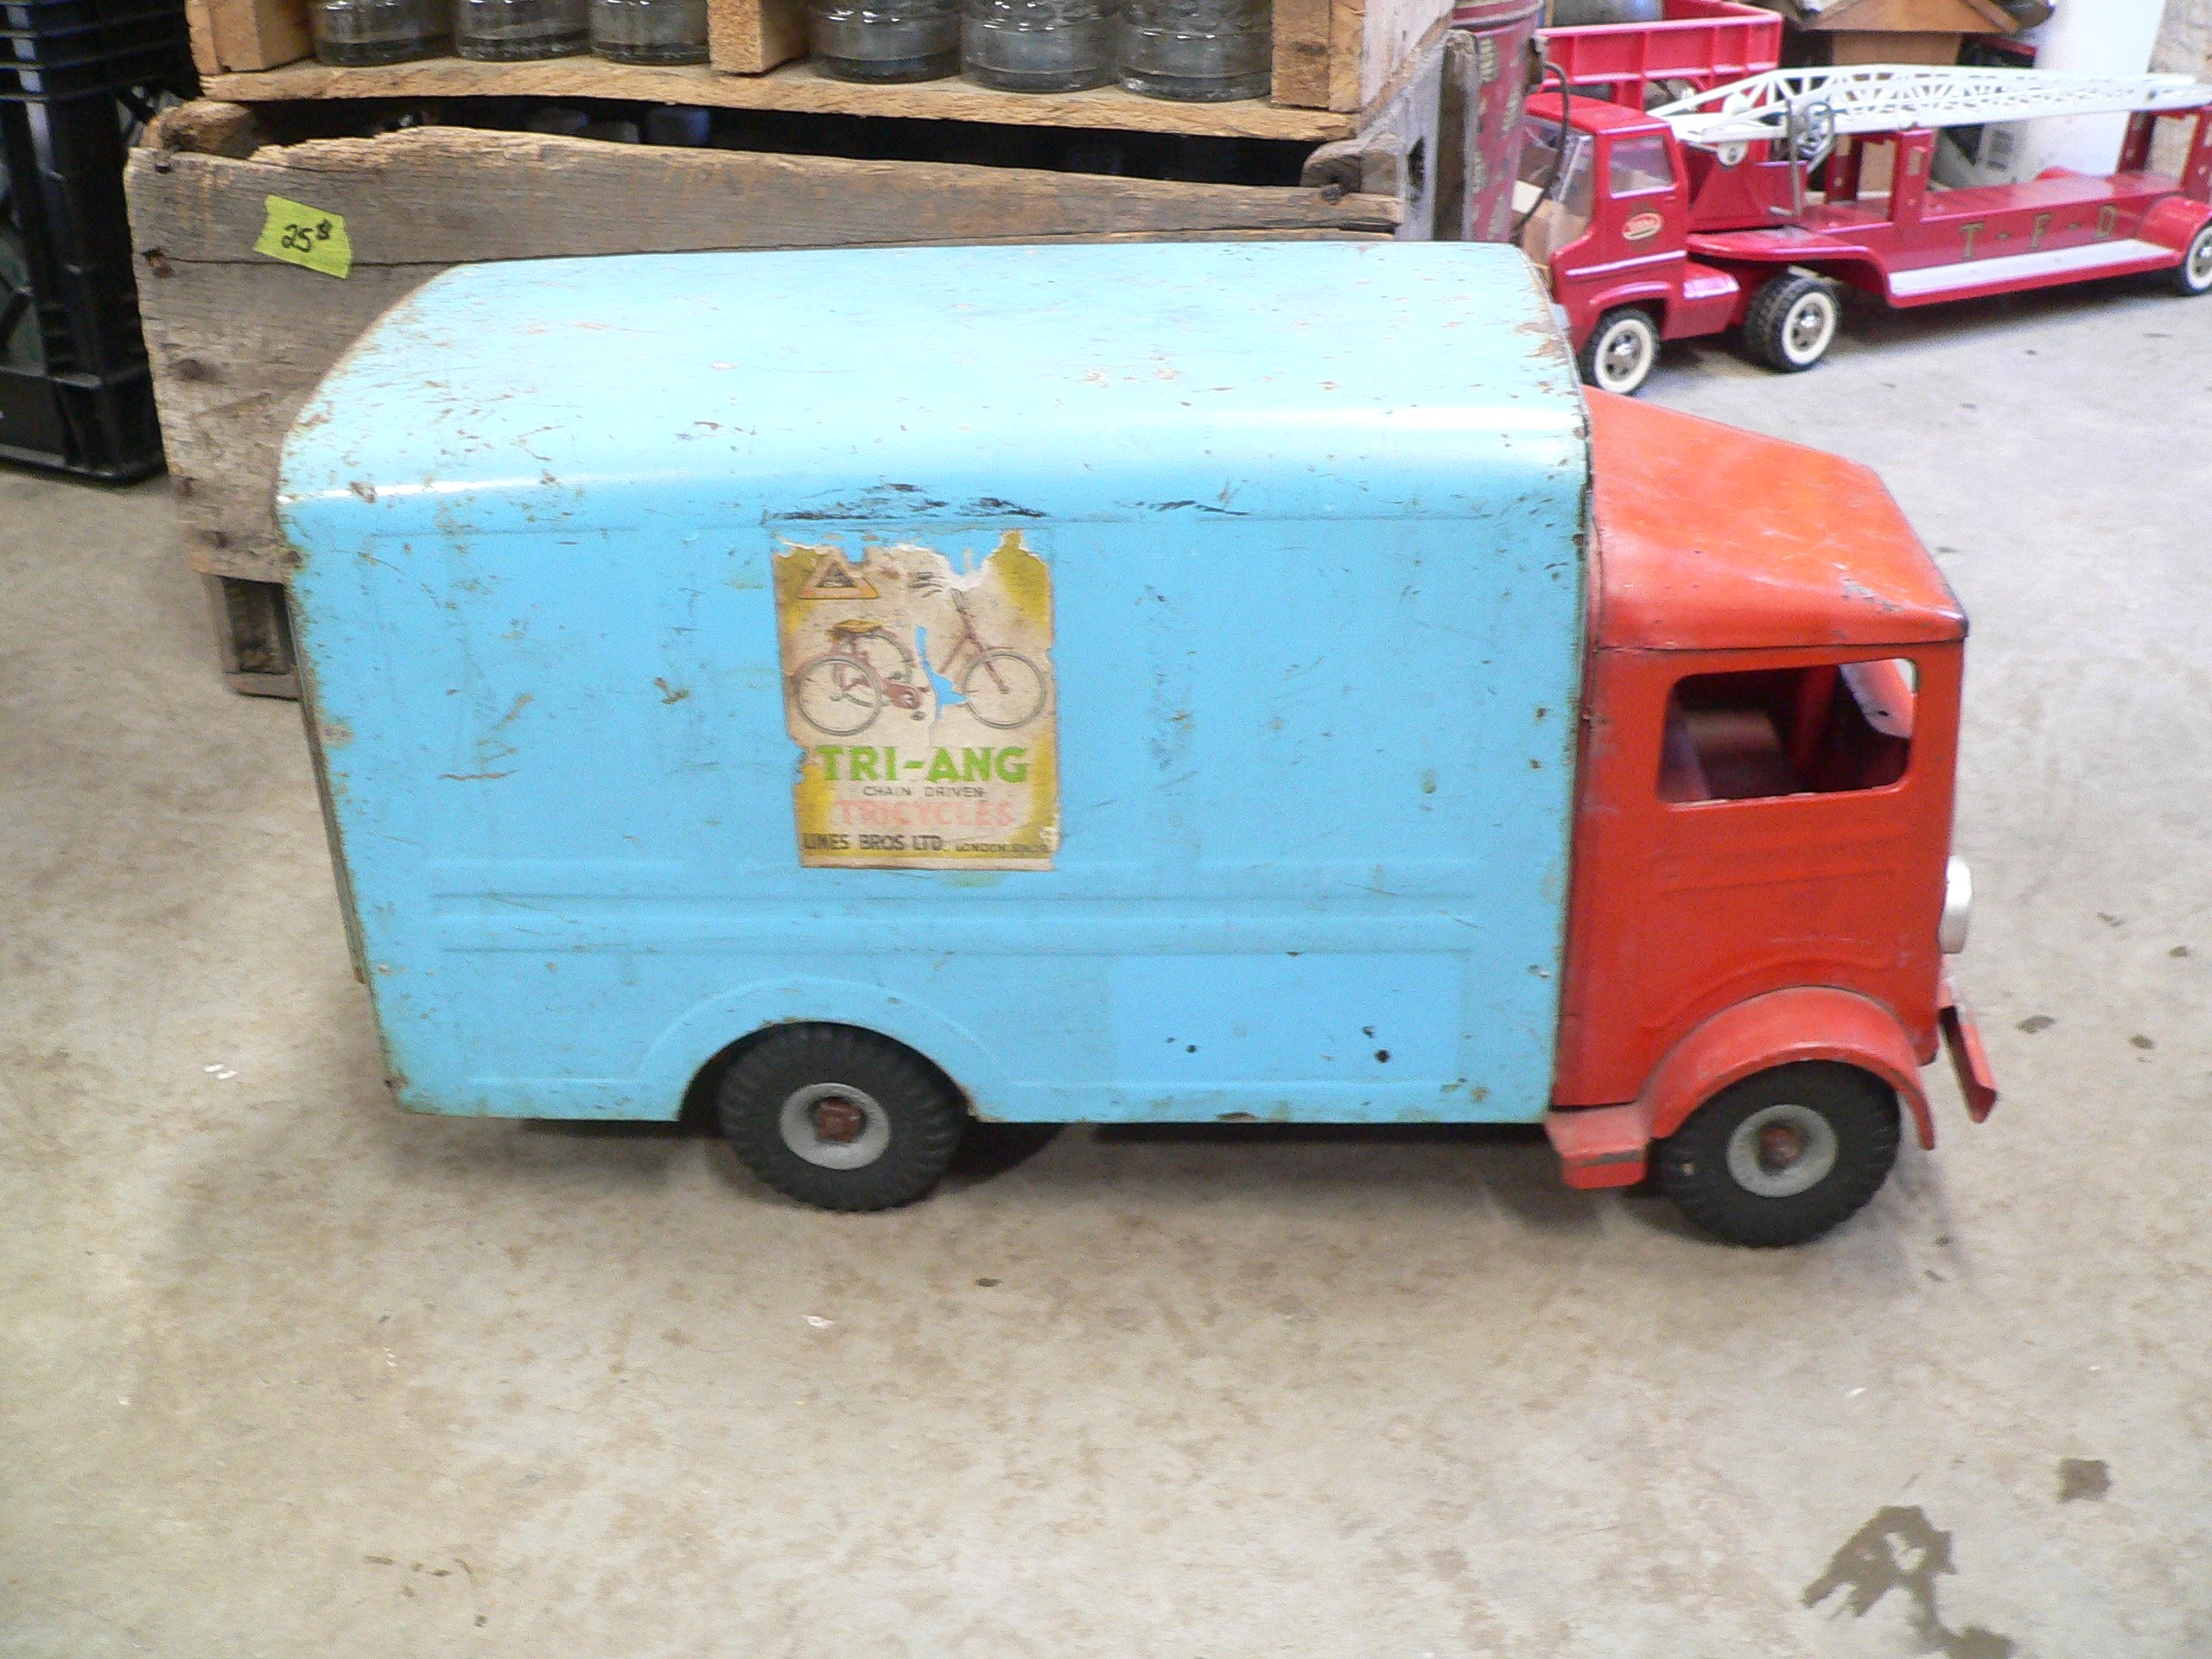 Camion antique tri-ang # 10899.4